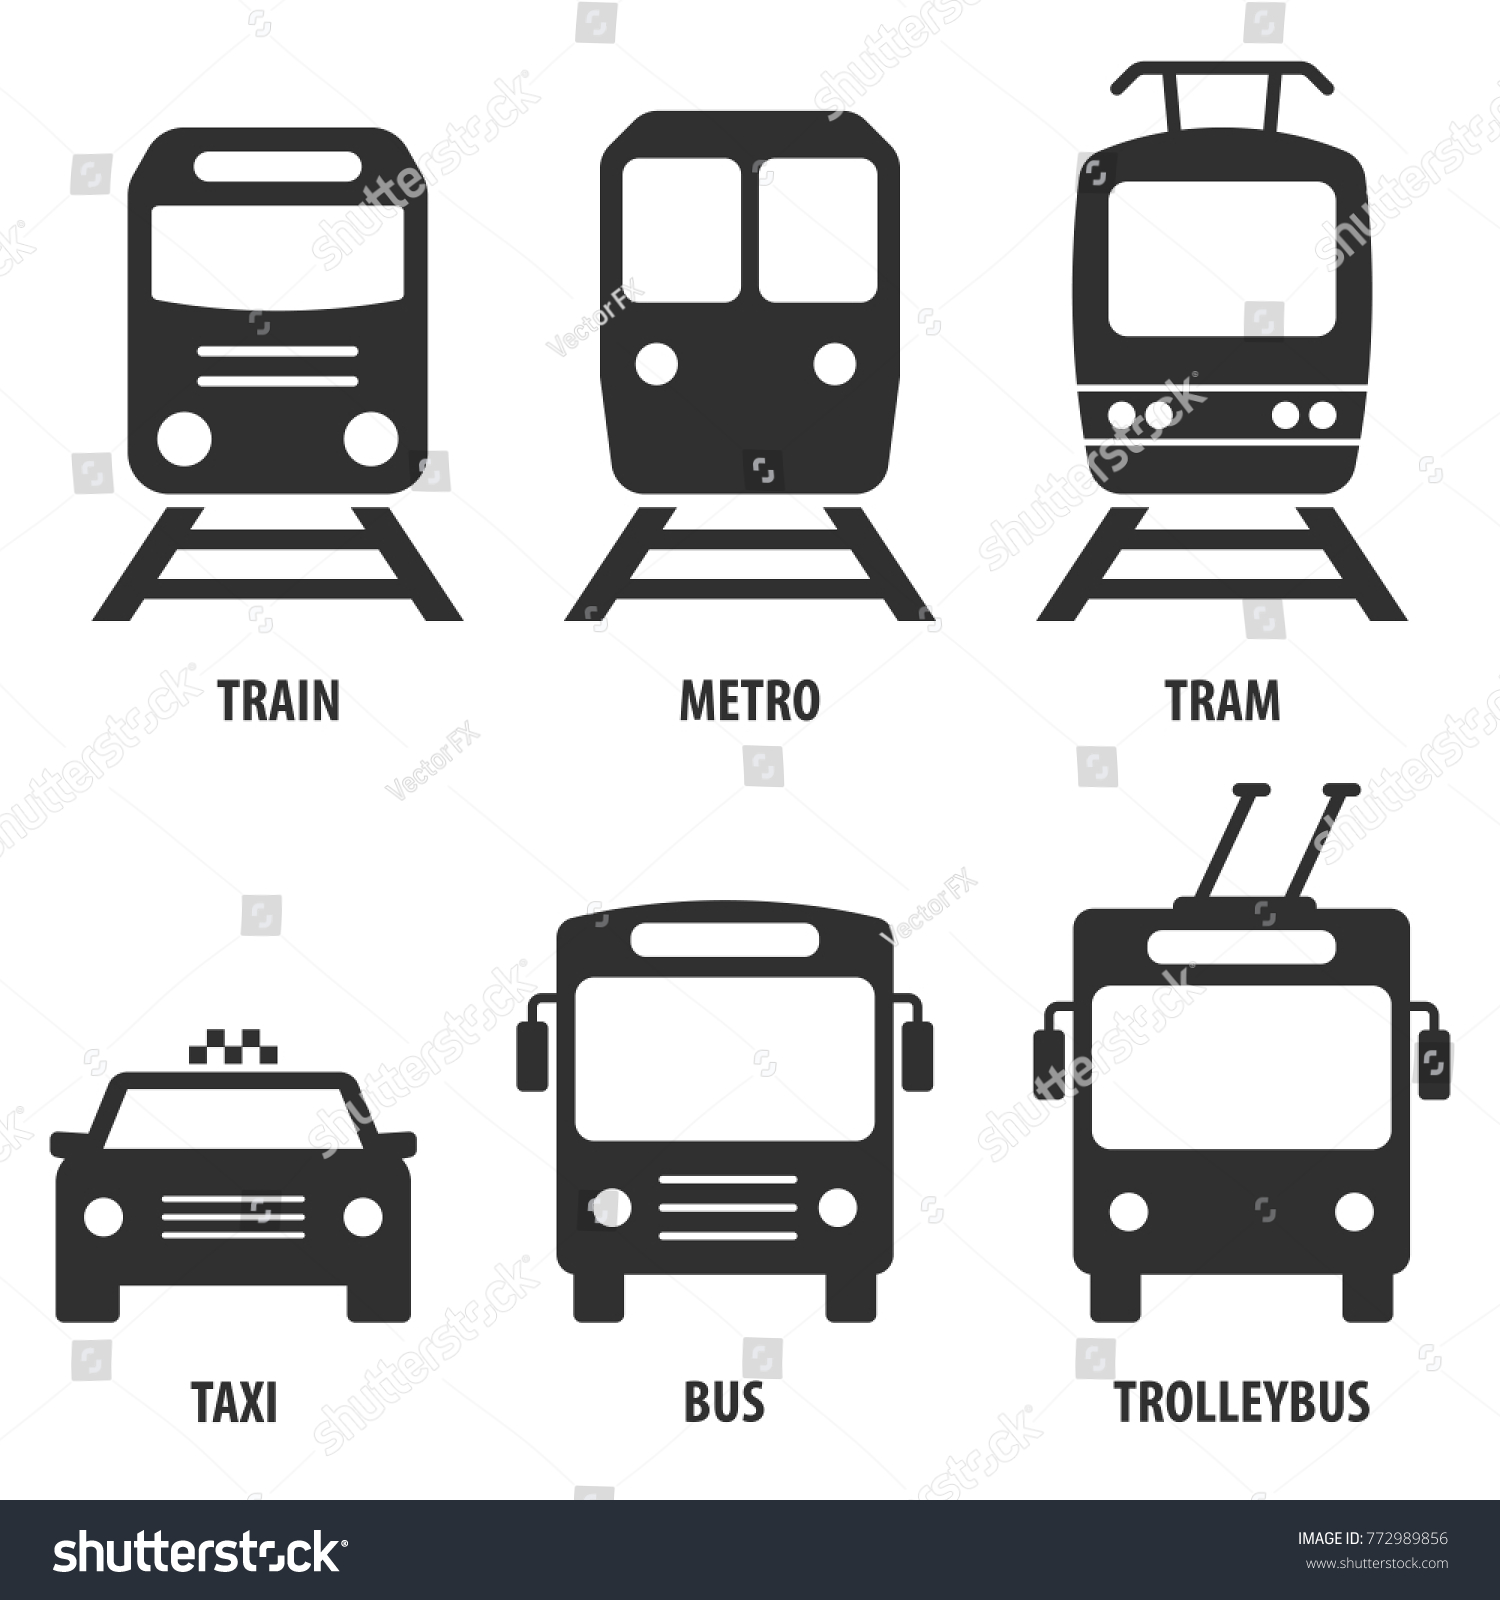 Train, metro, tram, bus, trolleybus, taxi. Set of passenger transport vector icons. Black symbols isolated on white. Signs for public transport stops and schemes. #772989856